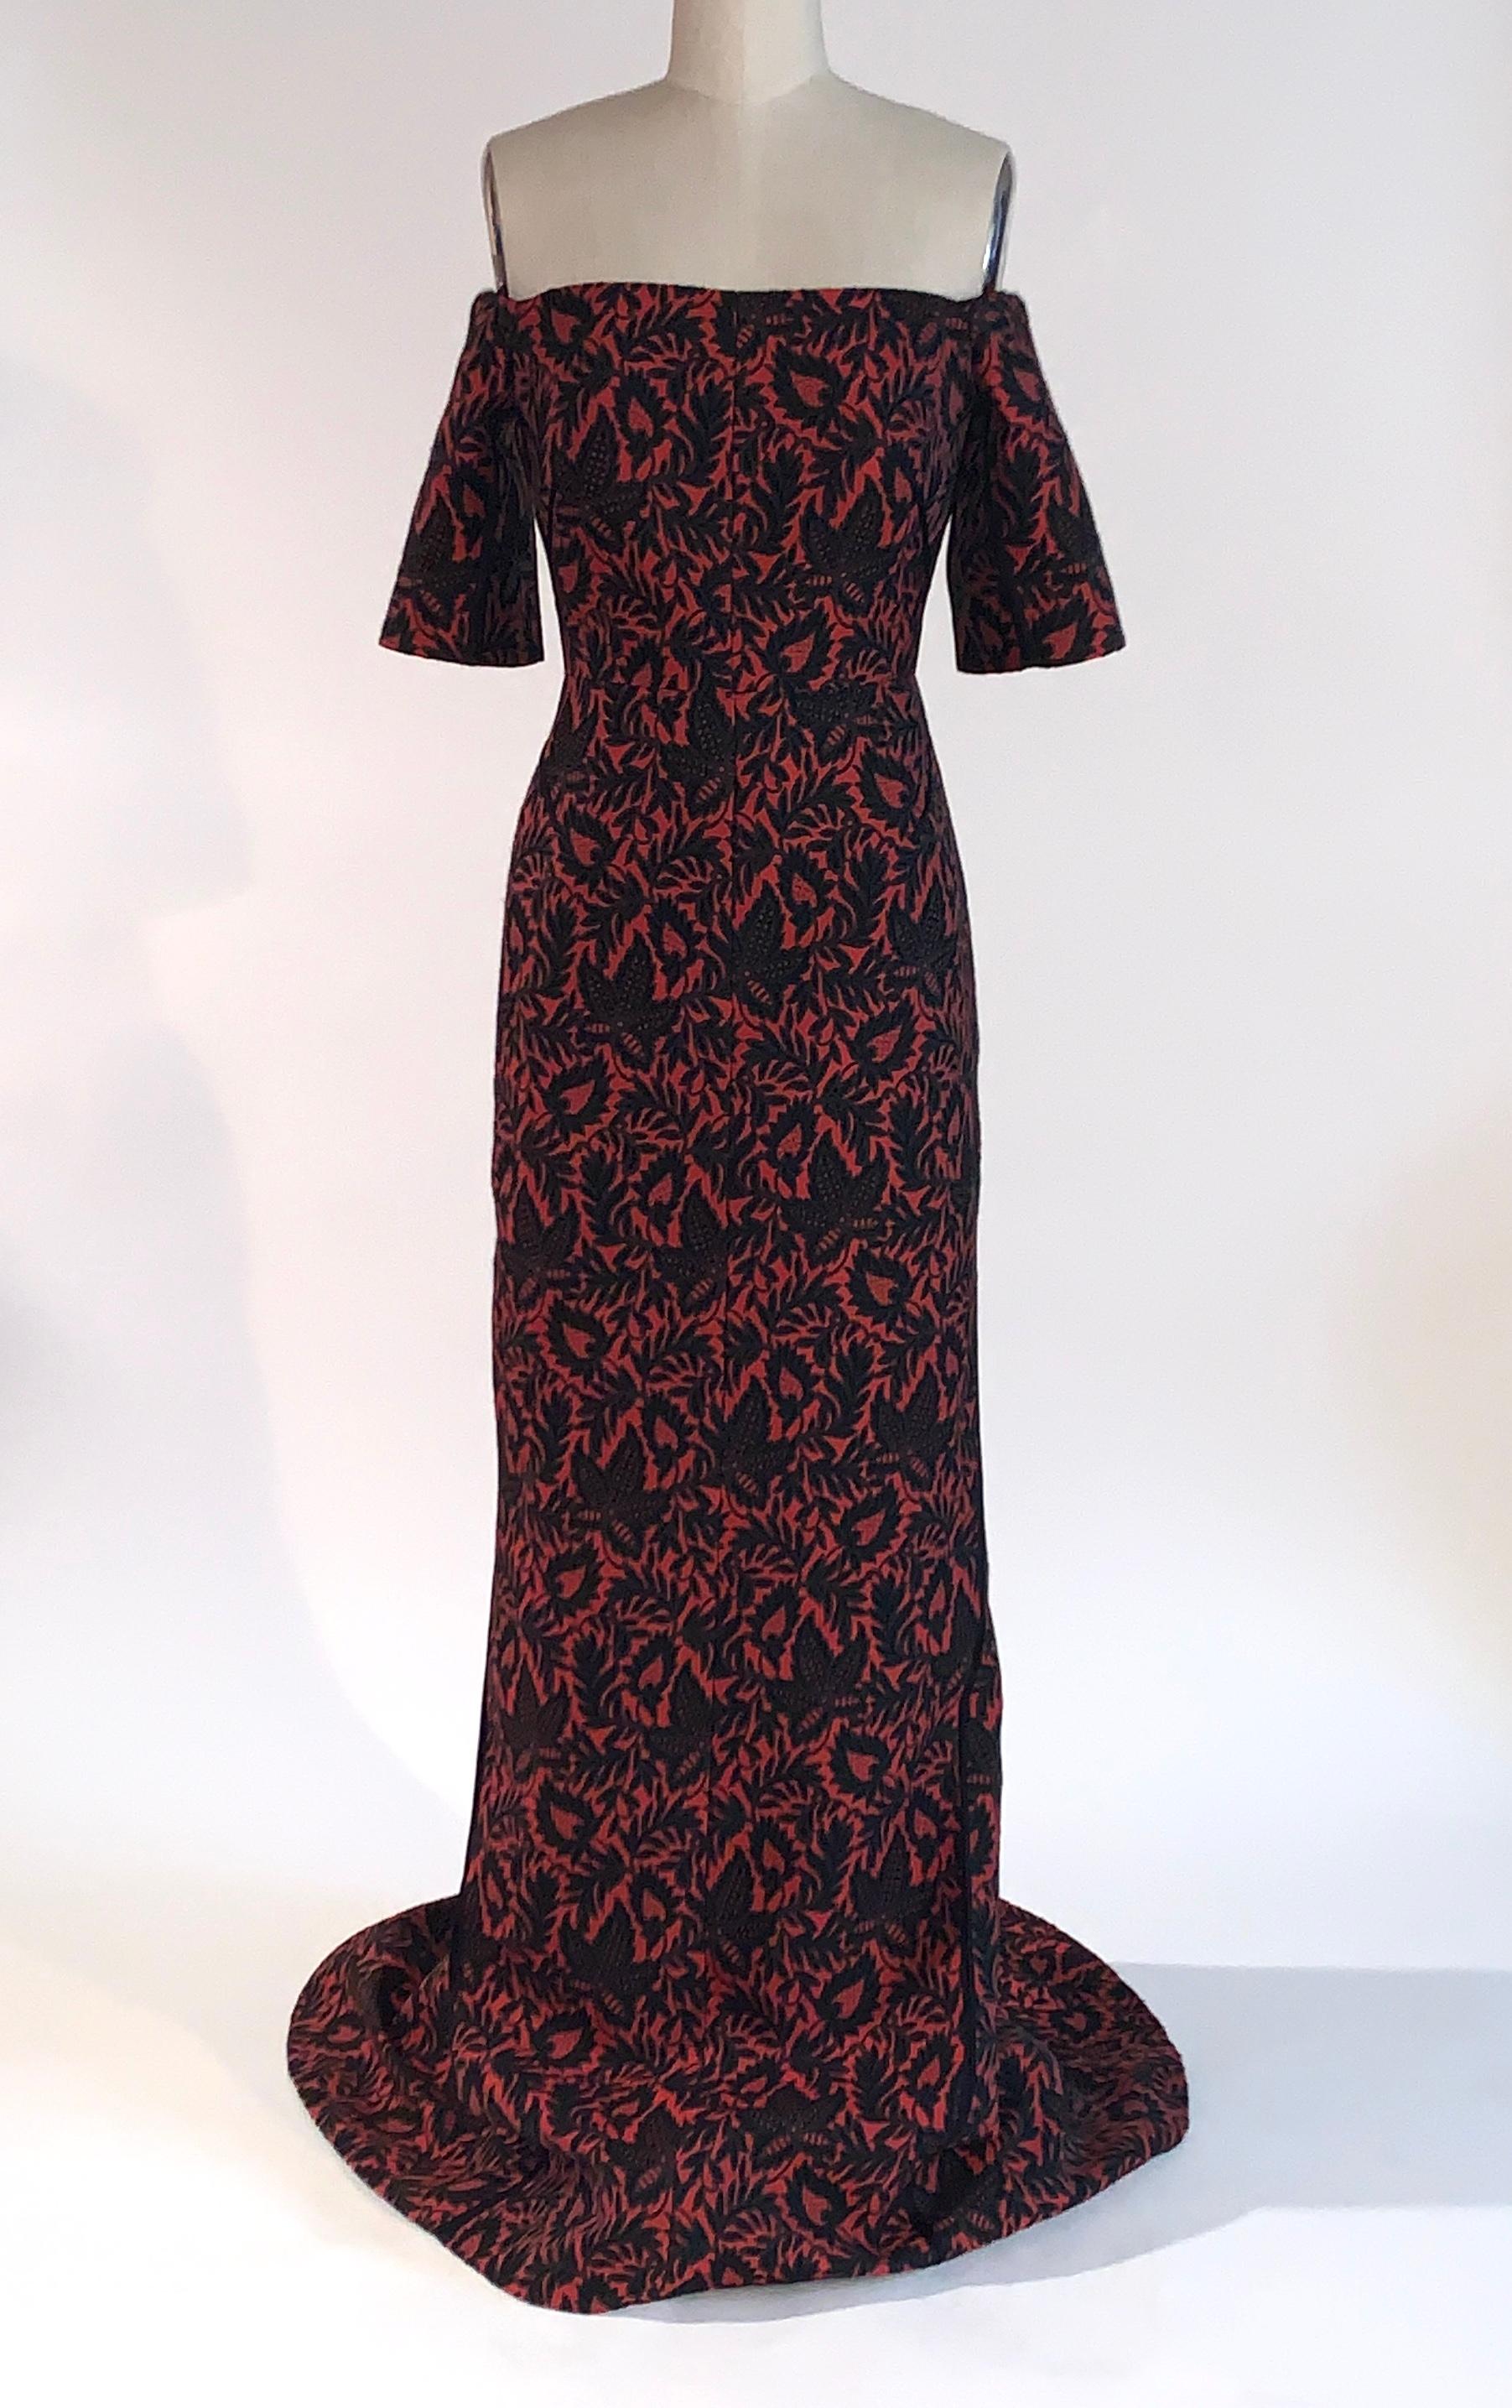 J Mendel red and black leaf print brocade gown. Off the shoulder design with short sleeve. Seams at side and bust feature black trim detail. Slight train at back. Light elastic at shoulders and built in cups at bust. Back zip and hook and eye. 

65%